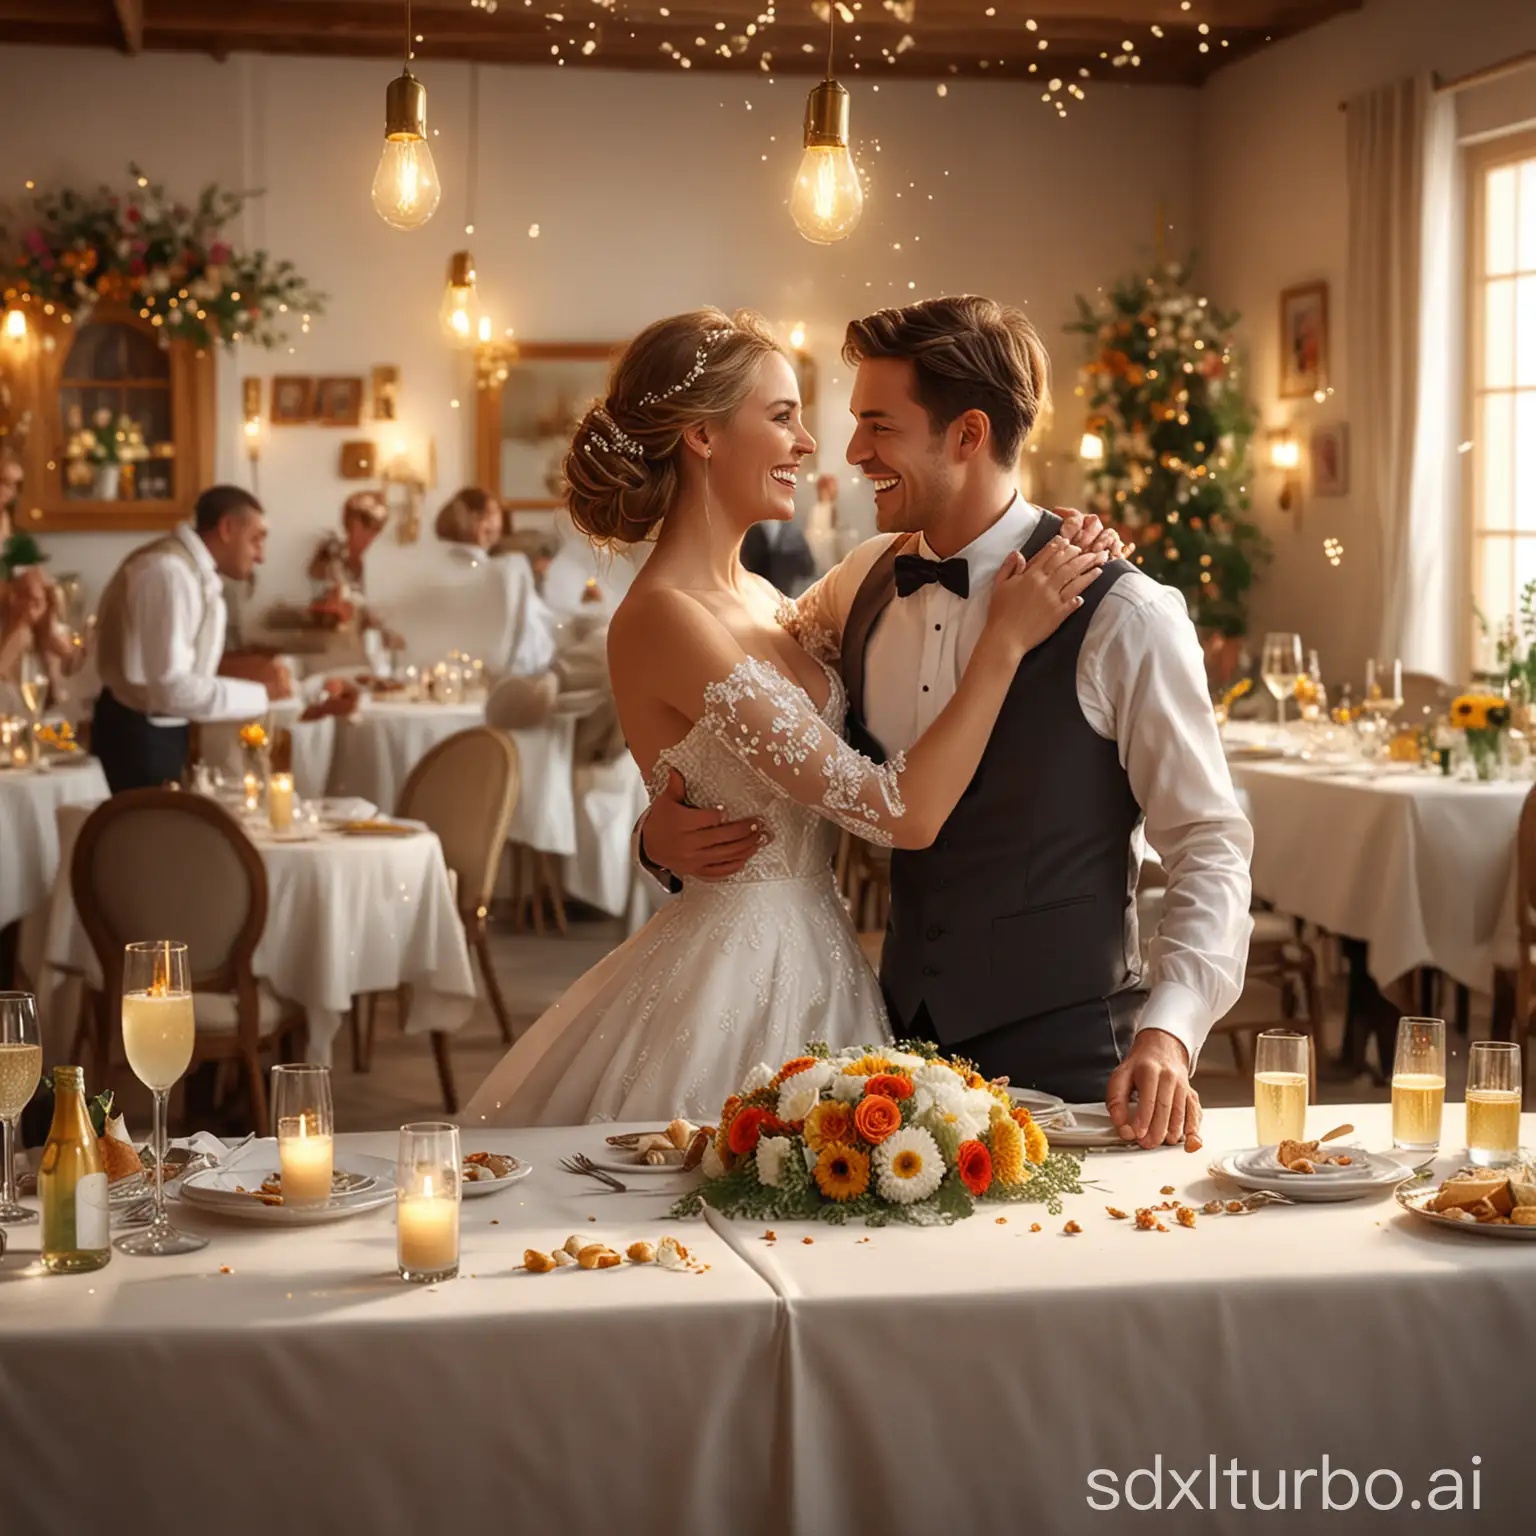 Elegant-Wedding-Celebration-with-Newlyweds-and-Guests-in-Warmly-Lit-Restaurant